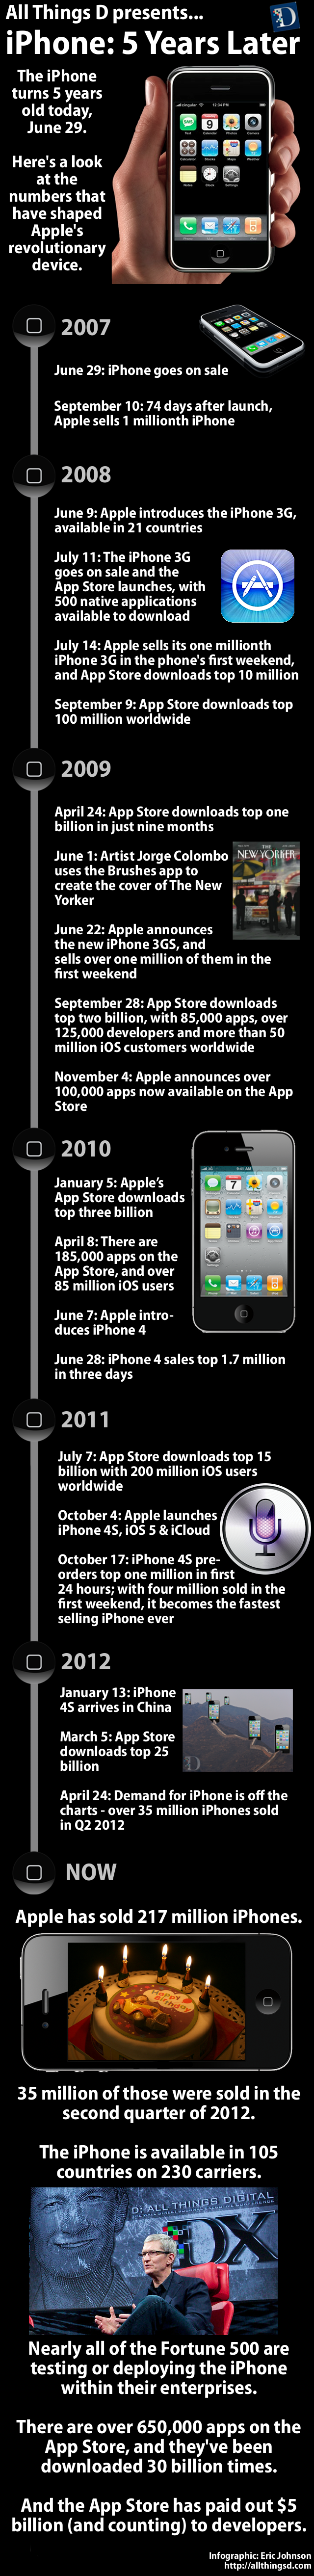 iphone 5 years infographic